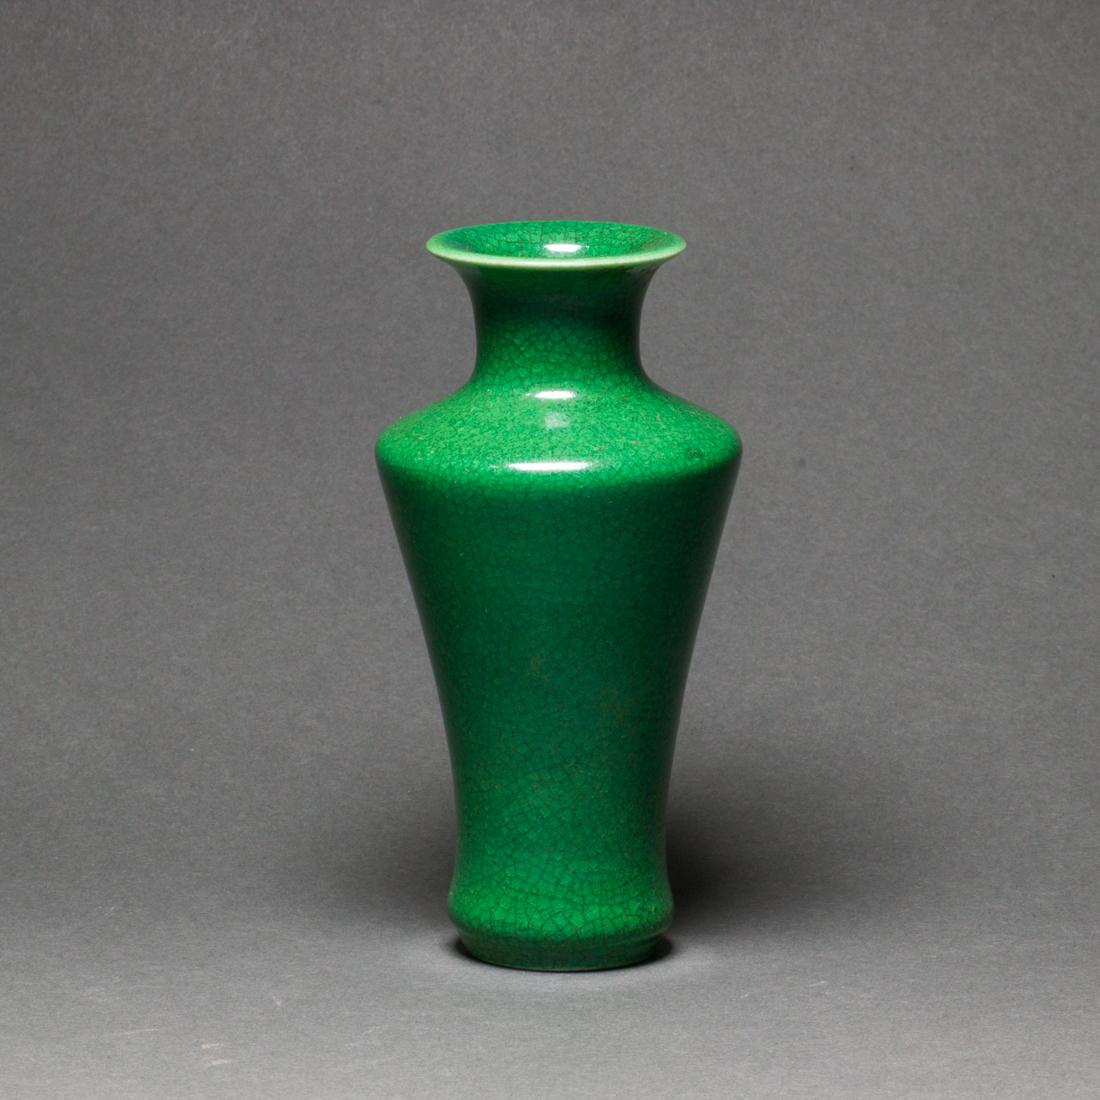 CHINESE GREEN GE TYPE GLAZED VASE 3a15ac